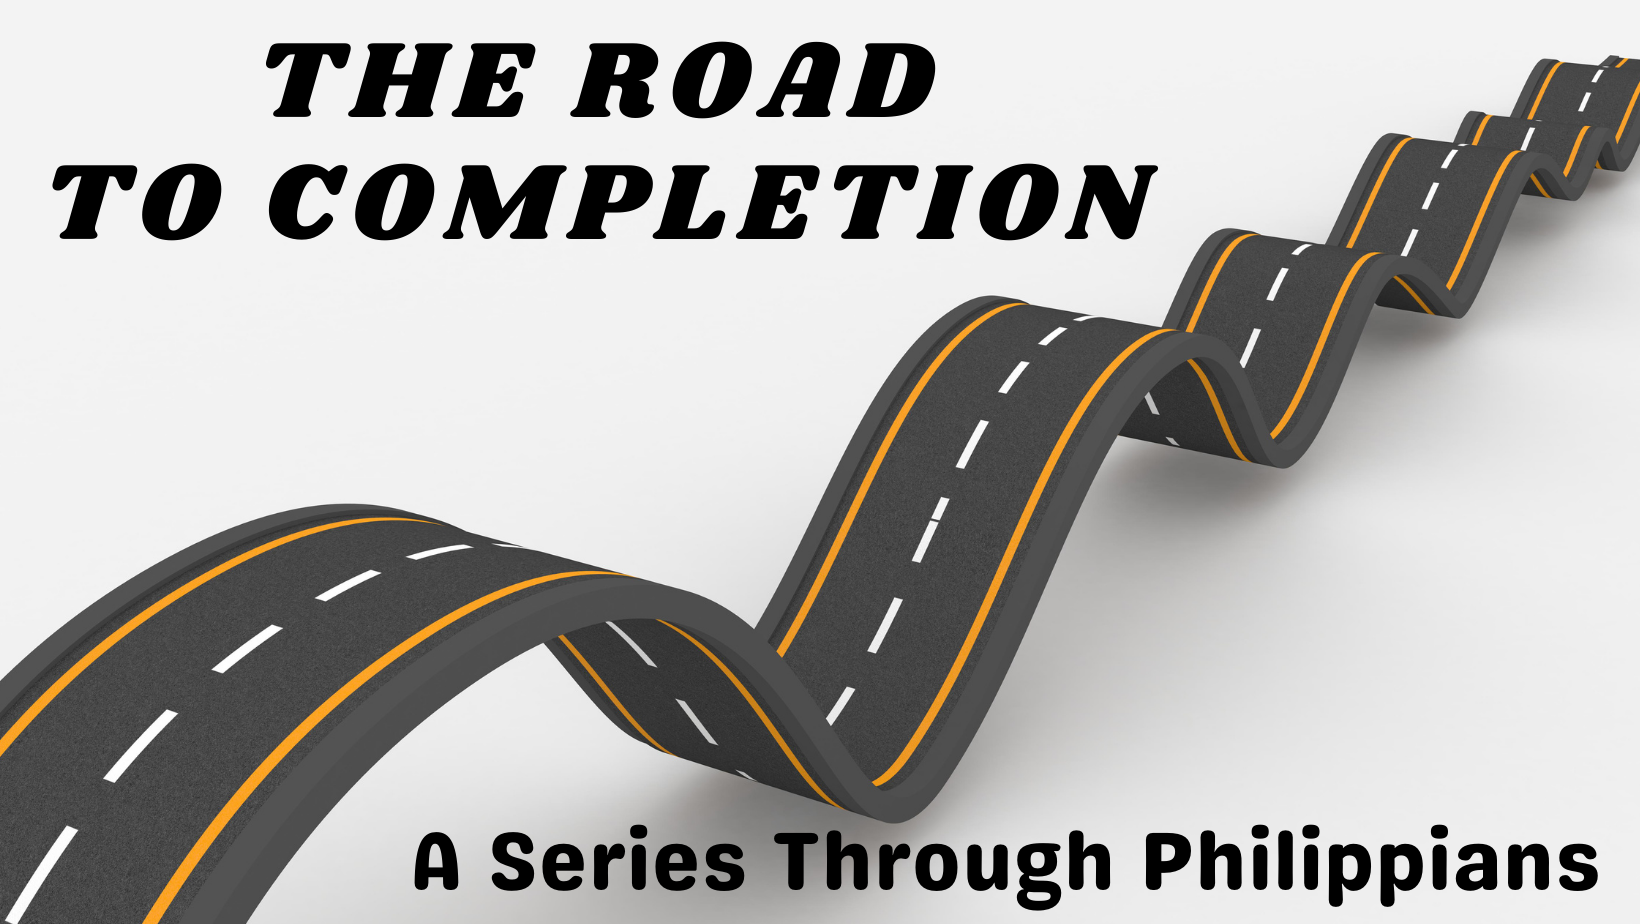 Road To completion - Live a Life worthy of the Gospel.